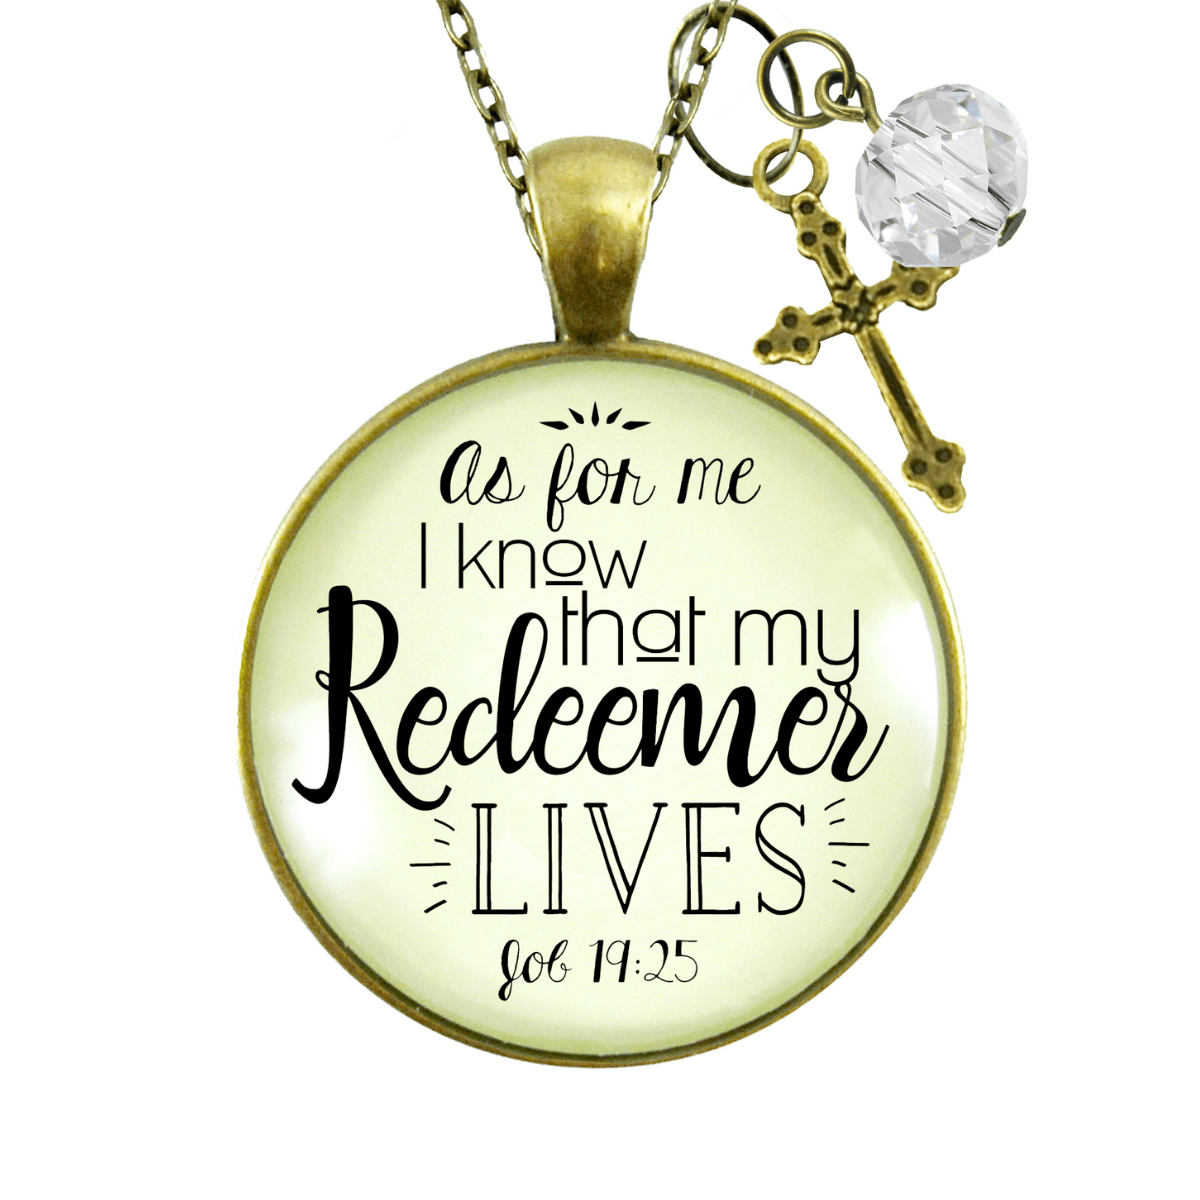 Gutsy Goodness I Know My Redeemer Lives Necklace Faith in Jesus Cross Womens Jewelry - Gutsy Goodness;I Know My Redeemer Lives Necklace Faith In Jesus Cross Womens Jewelry - Gutsy Goodness Handmade Jewelry Gifts